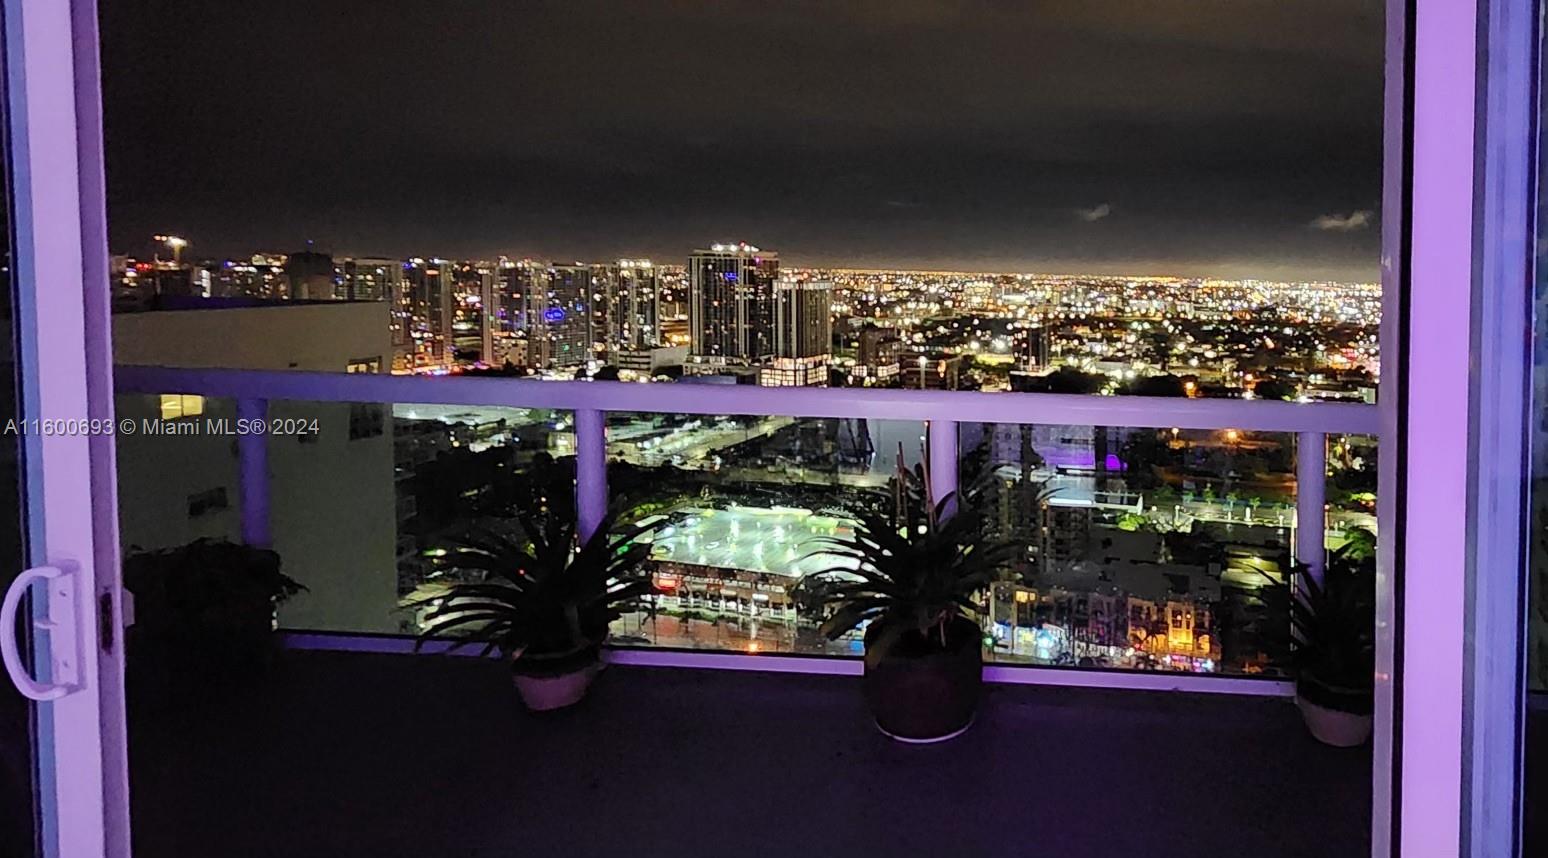 BEAUTIFUL 2/2 W/ 1144 + 192 sq ft w/SPECTACULAR SUNSET/POOL VIEWS from the 41st floor. Floor to ceiling windows in the living room, dining in both bathrooms with automatic 10% of black out shades. Open kitchen, split bedroom plan, tile and marble floors, washer/dryer & 1 parking space. Cable & high-speed internet INCLUDED in HOA. Full amenity building, including valet, doorman, concierge, pool and gym attendant in house, management spectacular pool area Jacuzzi sauna steam state-of-the art gym. WALK to Margaret Pace Park, nightlife, Banks’s, shops & 3 blocks to people mover. 5 minutes to South Beach, downtown Miami, the Design District, Midtown  & Wynwood. Easy access to all major highways & public transportation. 24 HOURS TO SHOW!

I